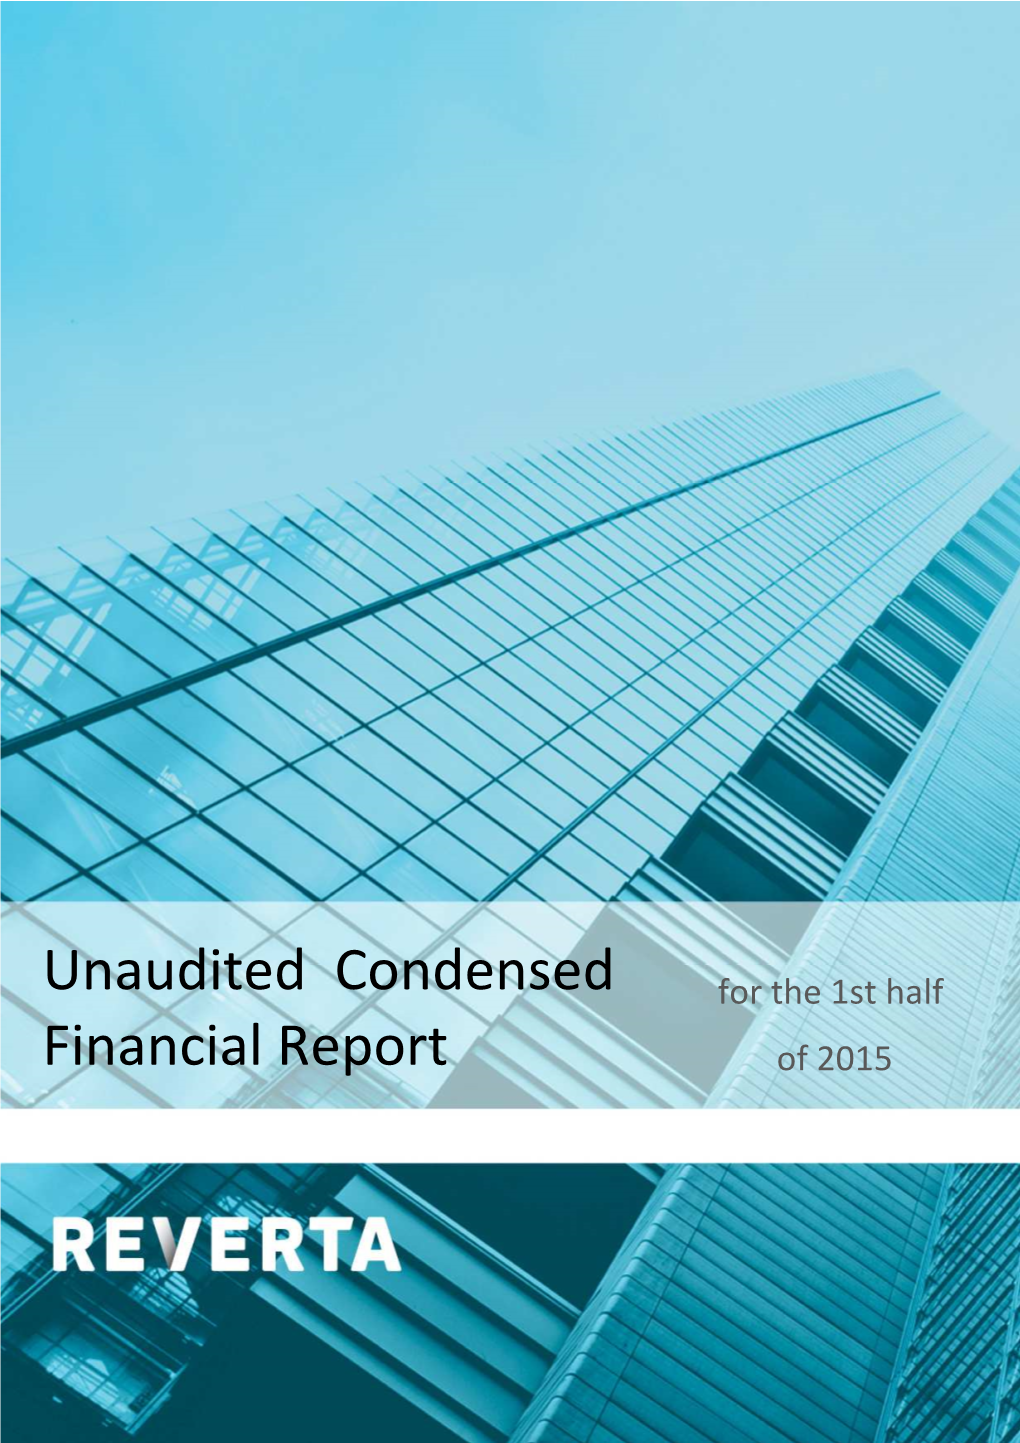 Unaudited Condensed Financial Report for the 1St Half of 2015